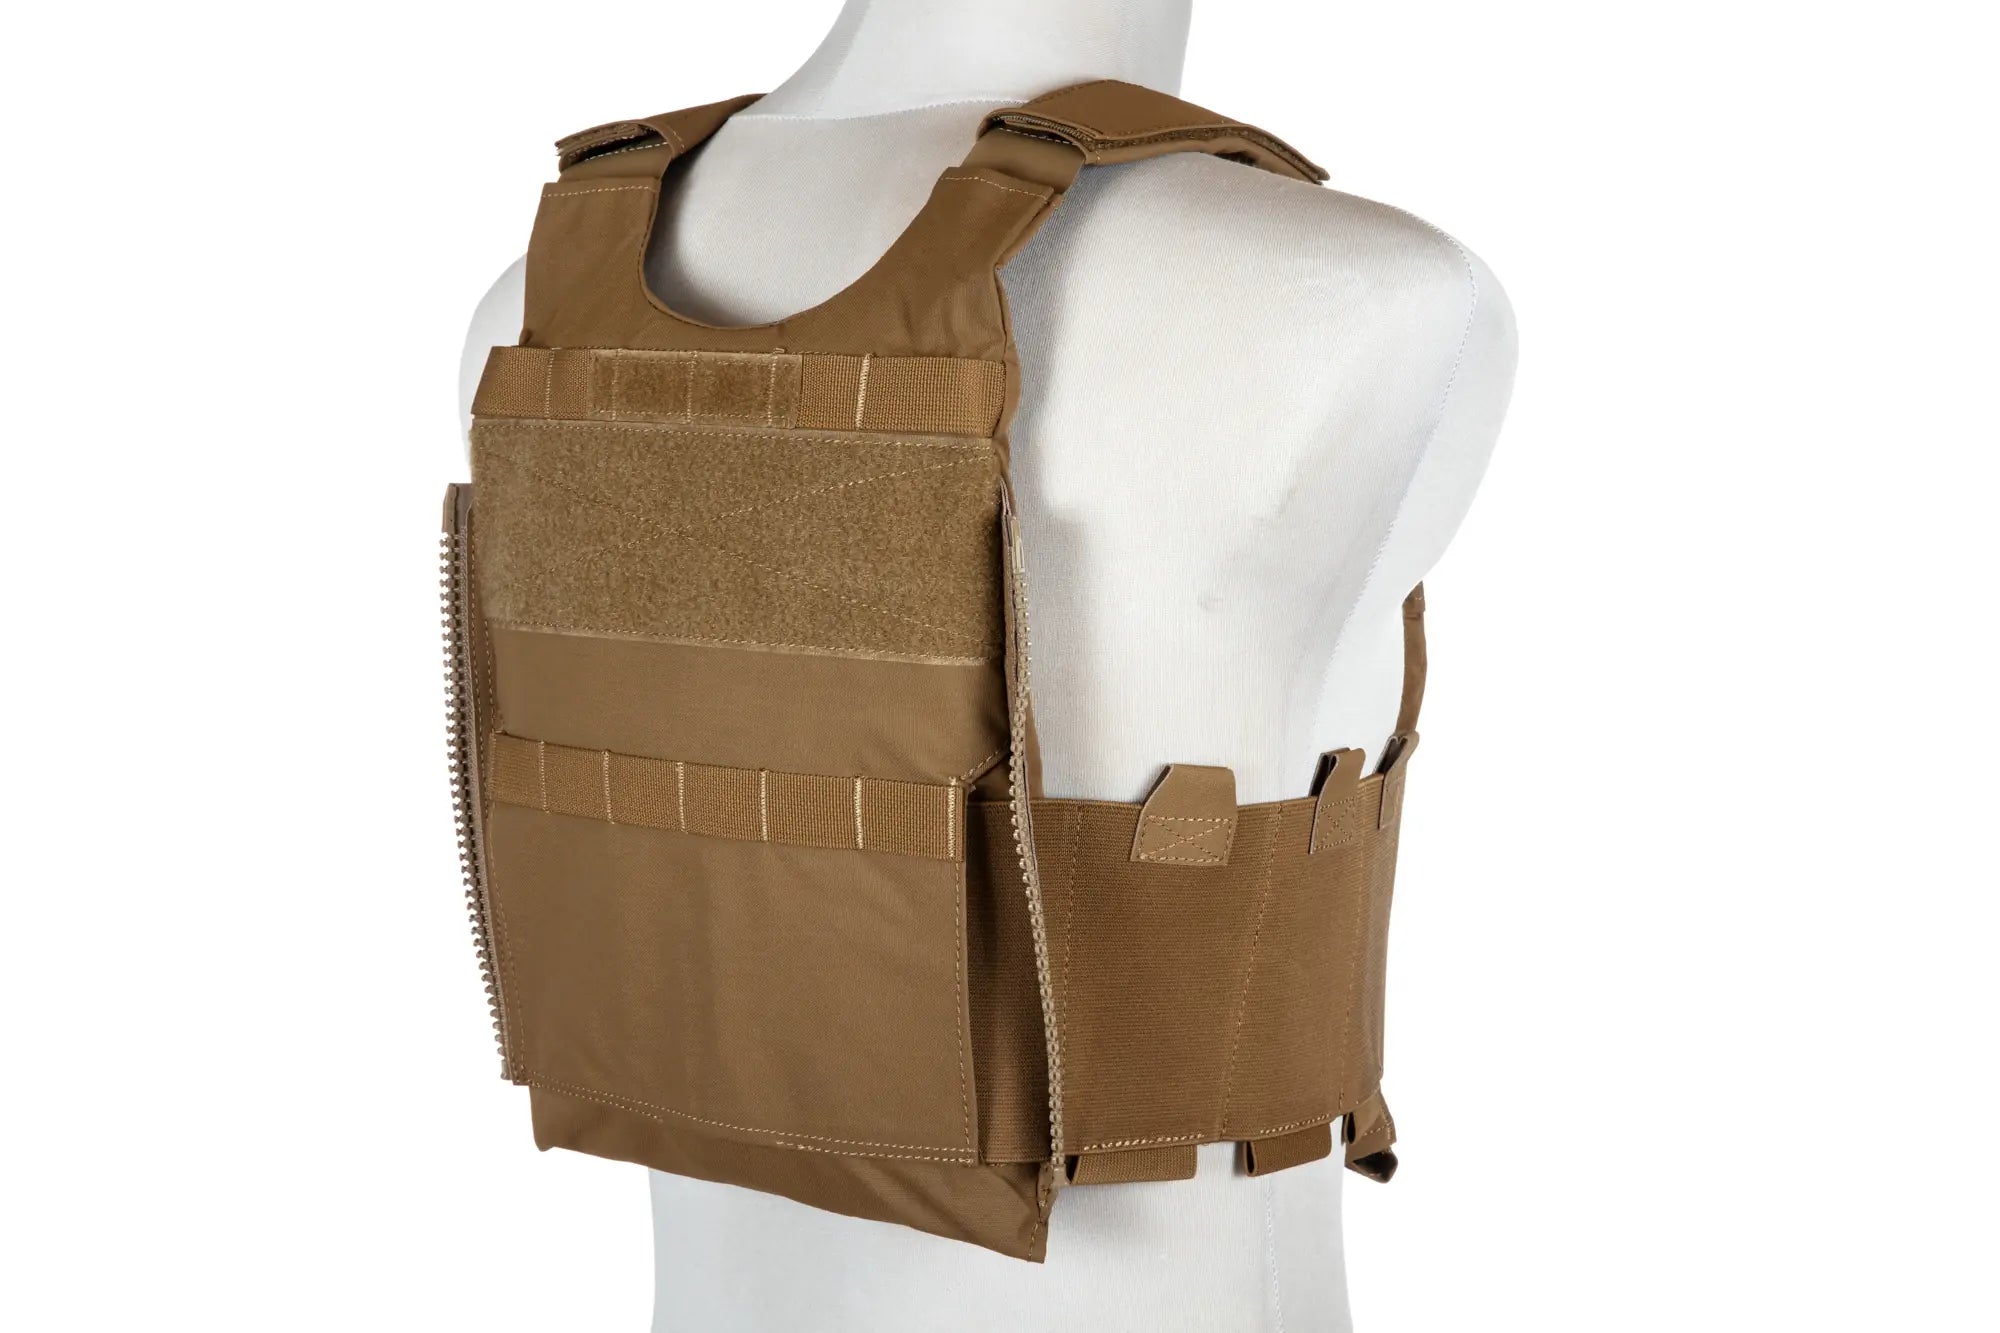 LV-119 Type Tactical Vest - Coyote Brown-3